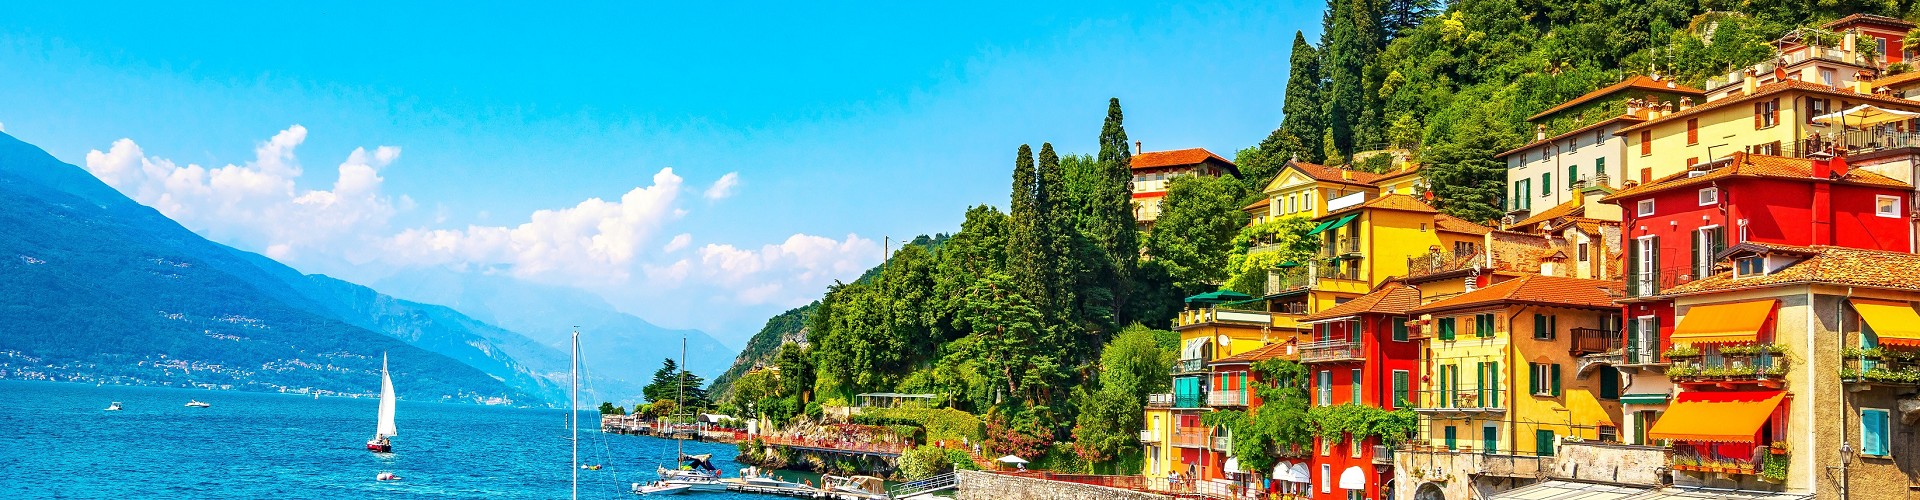 How to Reach Villa Balbianello | How do i get from Lenno to Bellagio